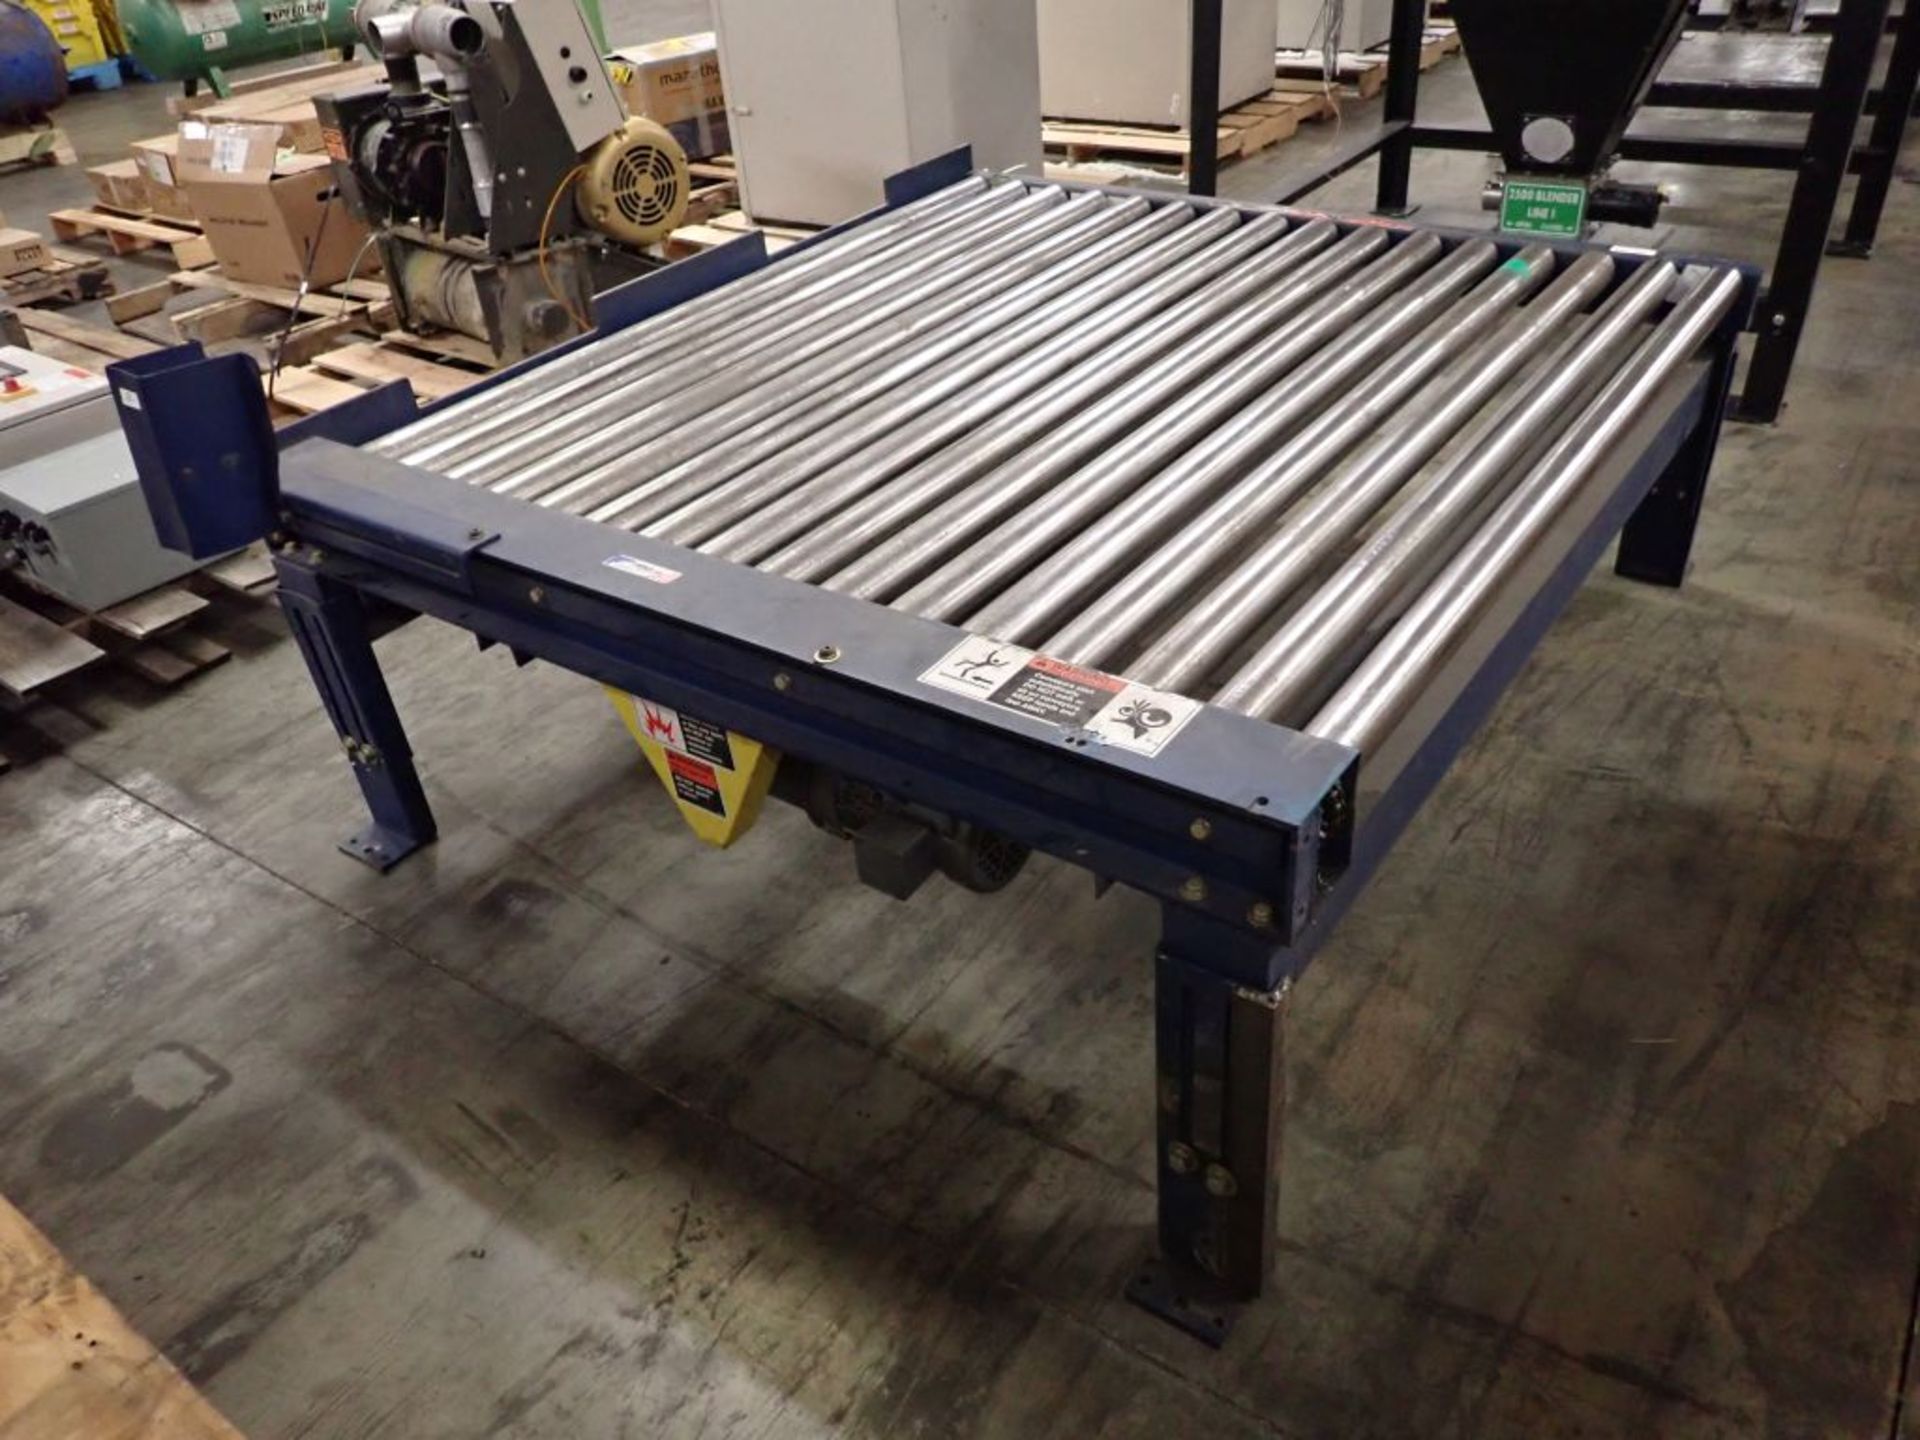 Lantech Pallet Wrapping System with Infeed and Outfeed Conveyor - Image 61 of 99